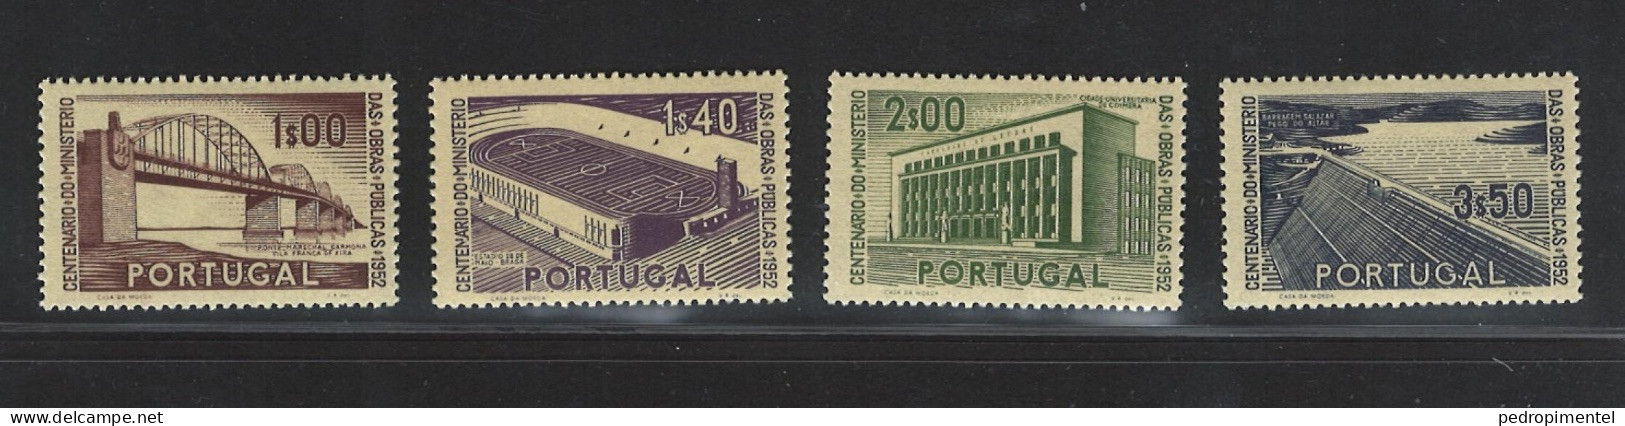 Portugal Stamps 1952 "Public Works" Condition MNH #755-758 - Unused Stamps